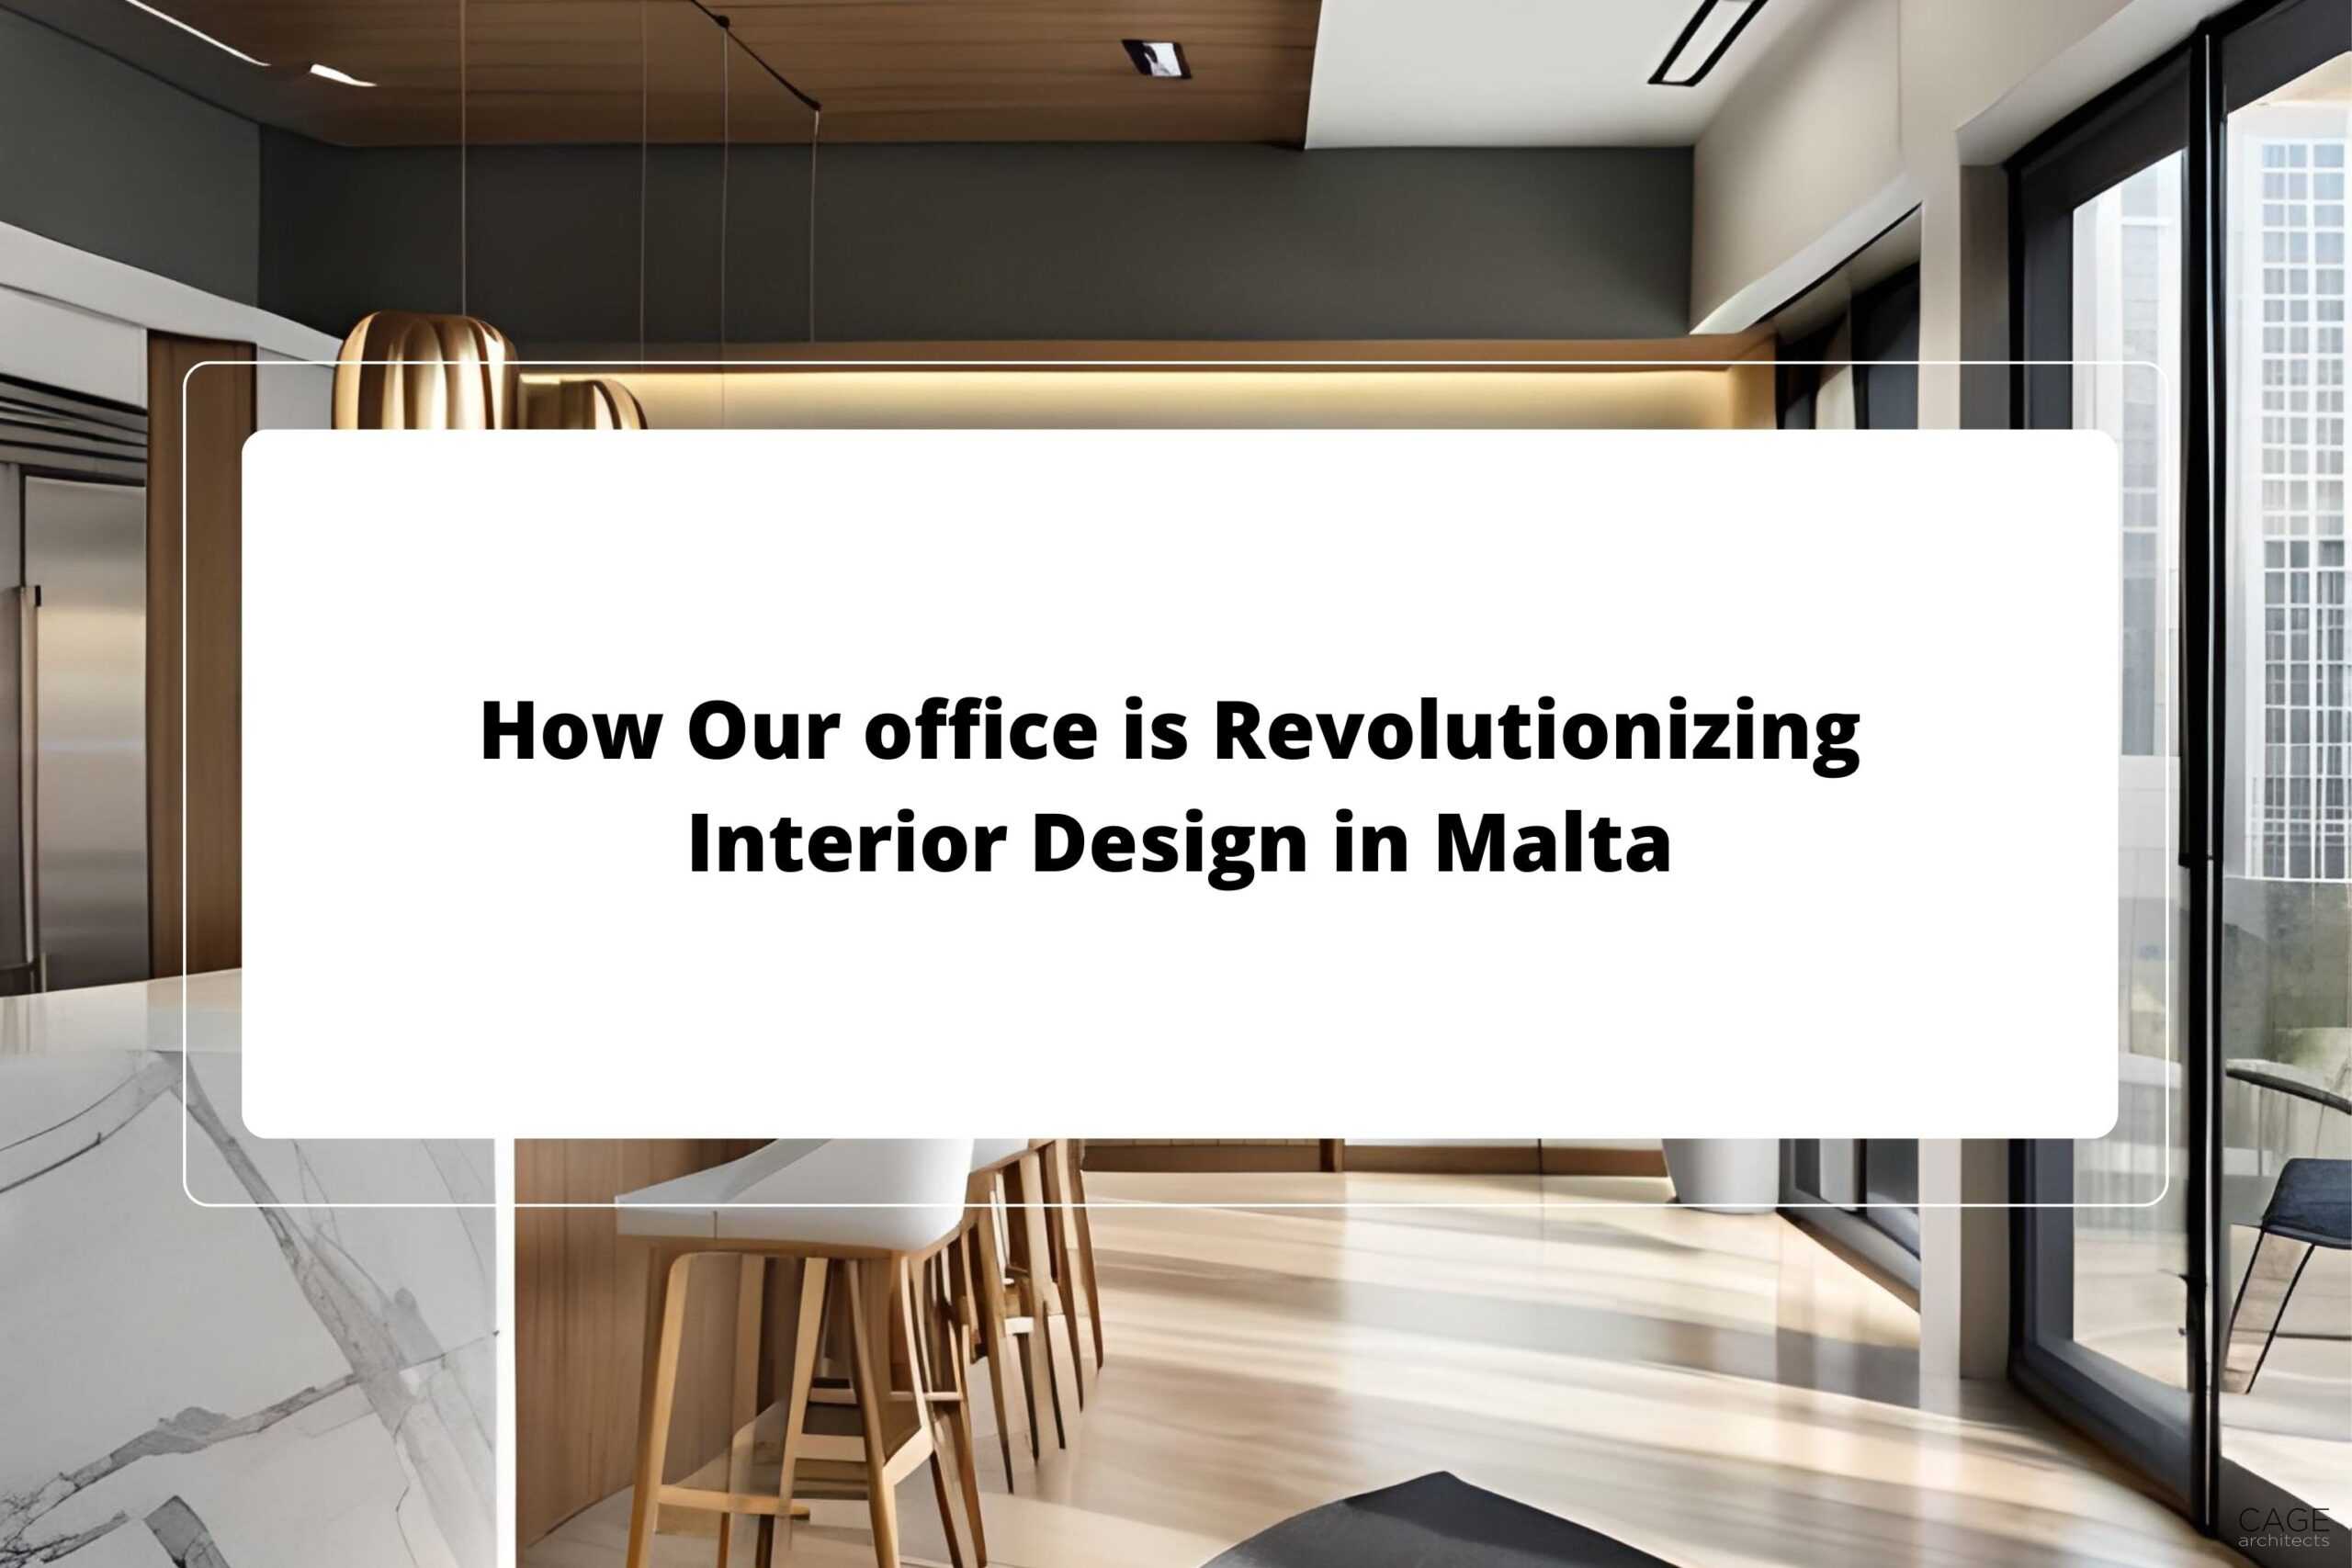 Architectural Inspiration: How Our office is Revolutionizing Interior Design in Malta